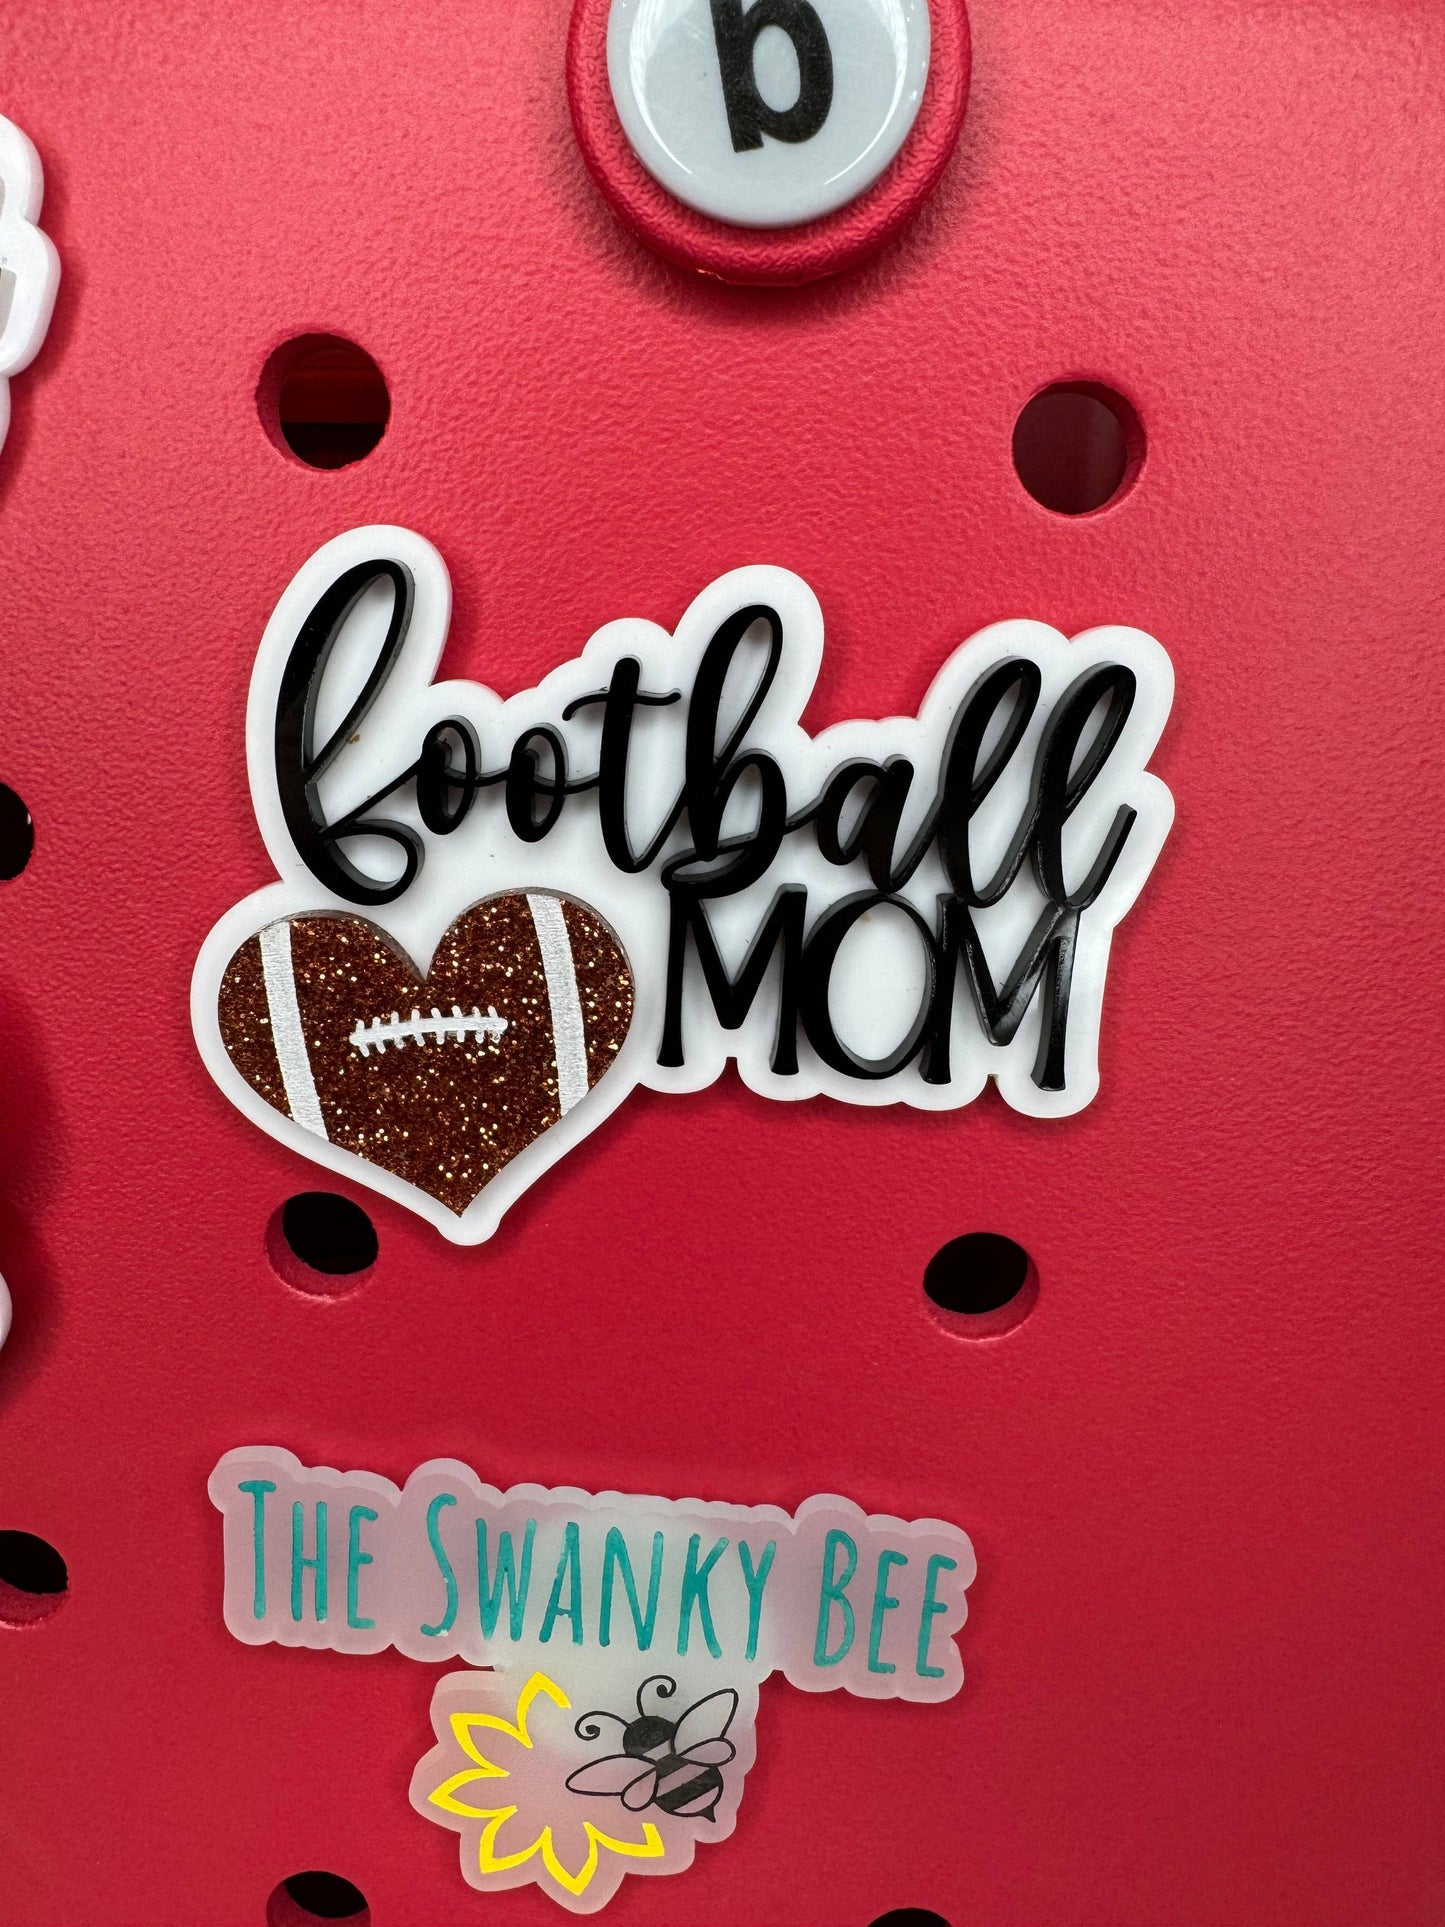 Sports Mom Charm for Bogg Style Bags - Supportive Mom Bag Accessory - Versatile Sports Theme - Perfect for Soccer, Baseball, Football Moms and Many more